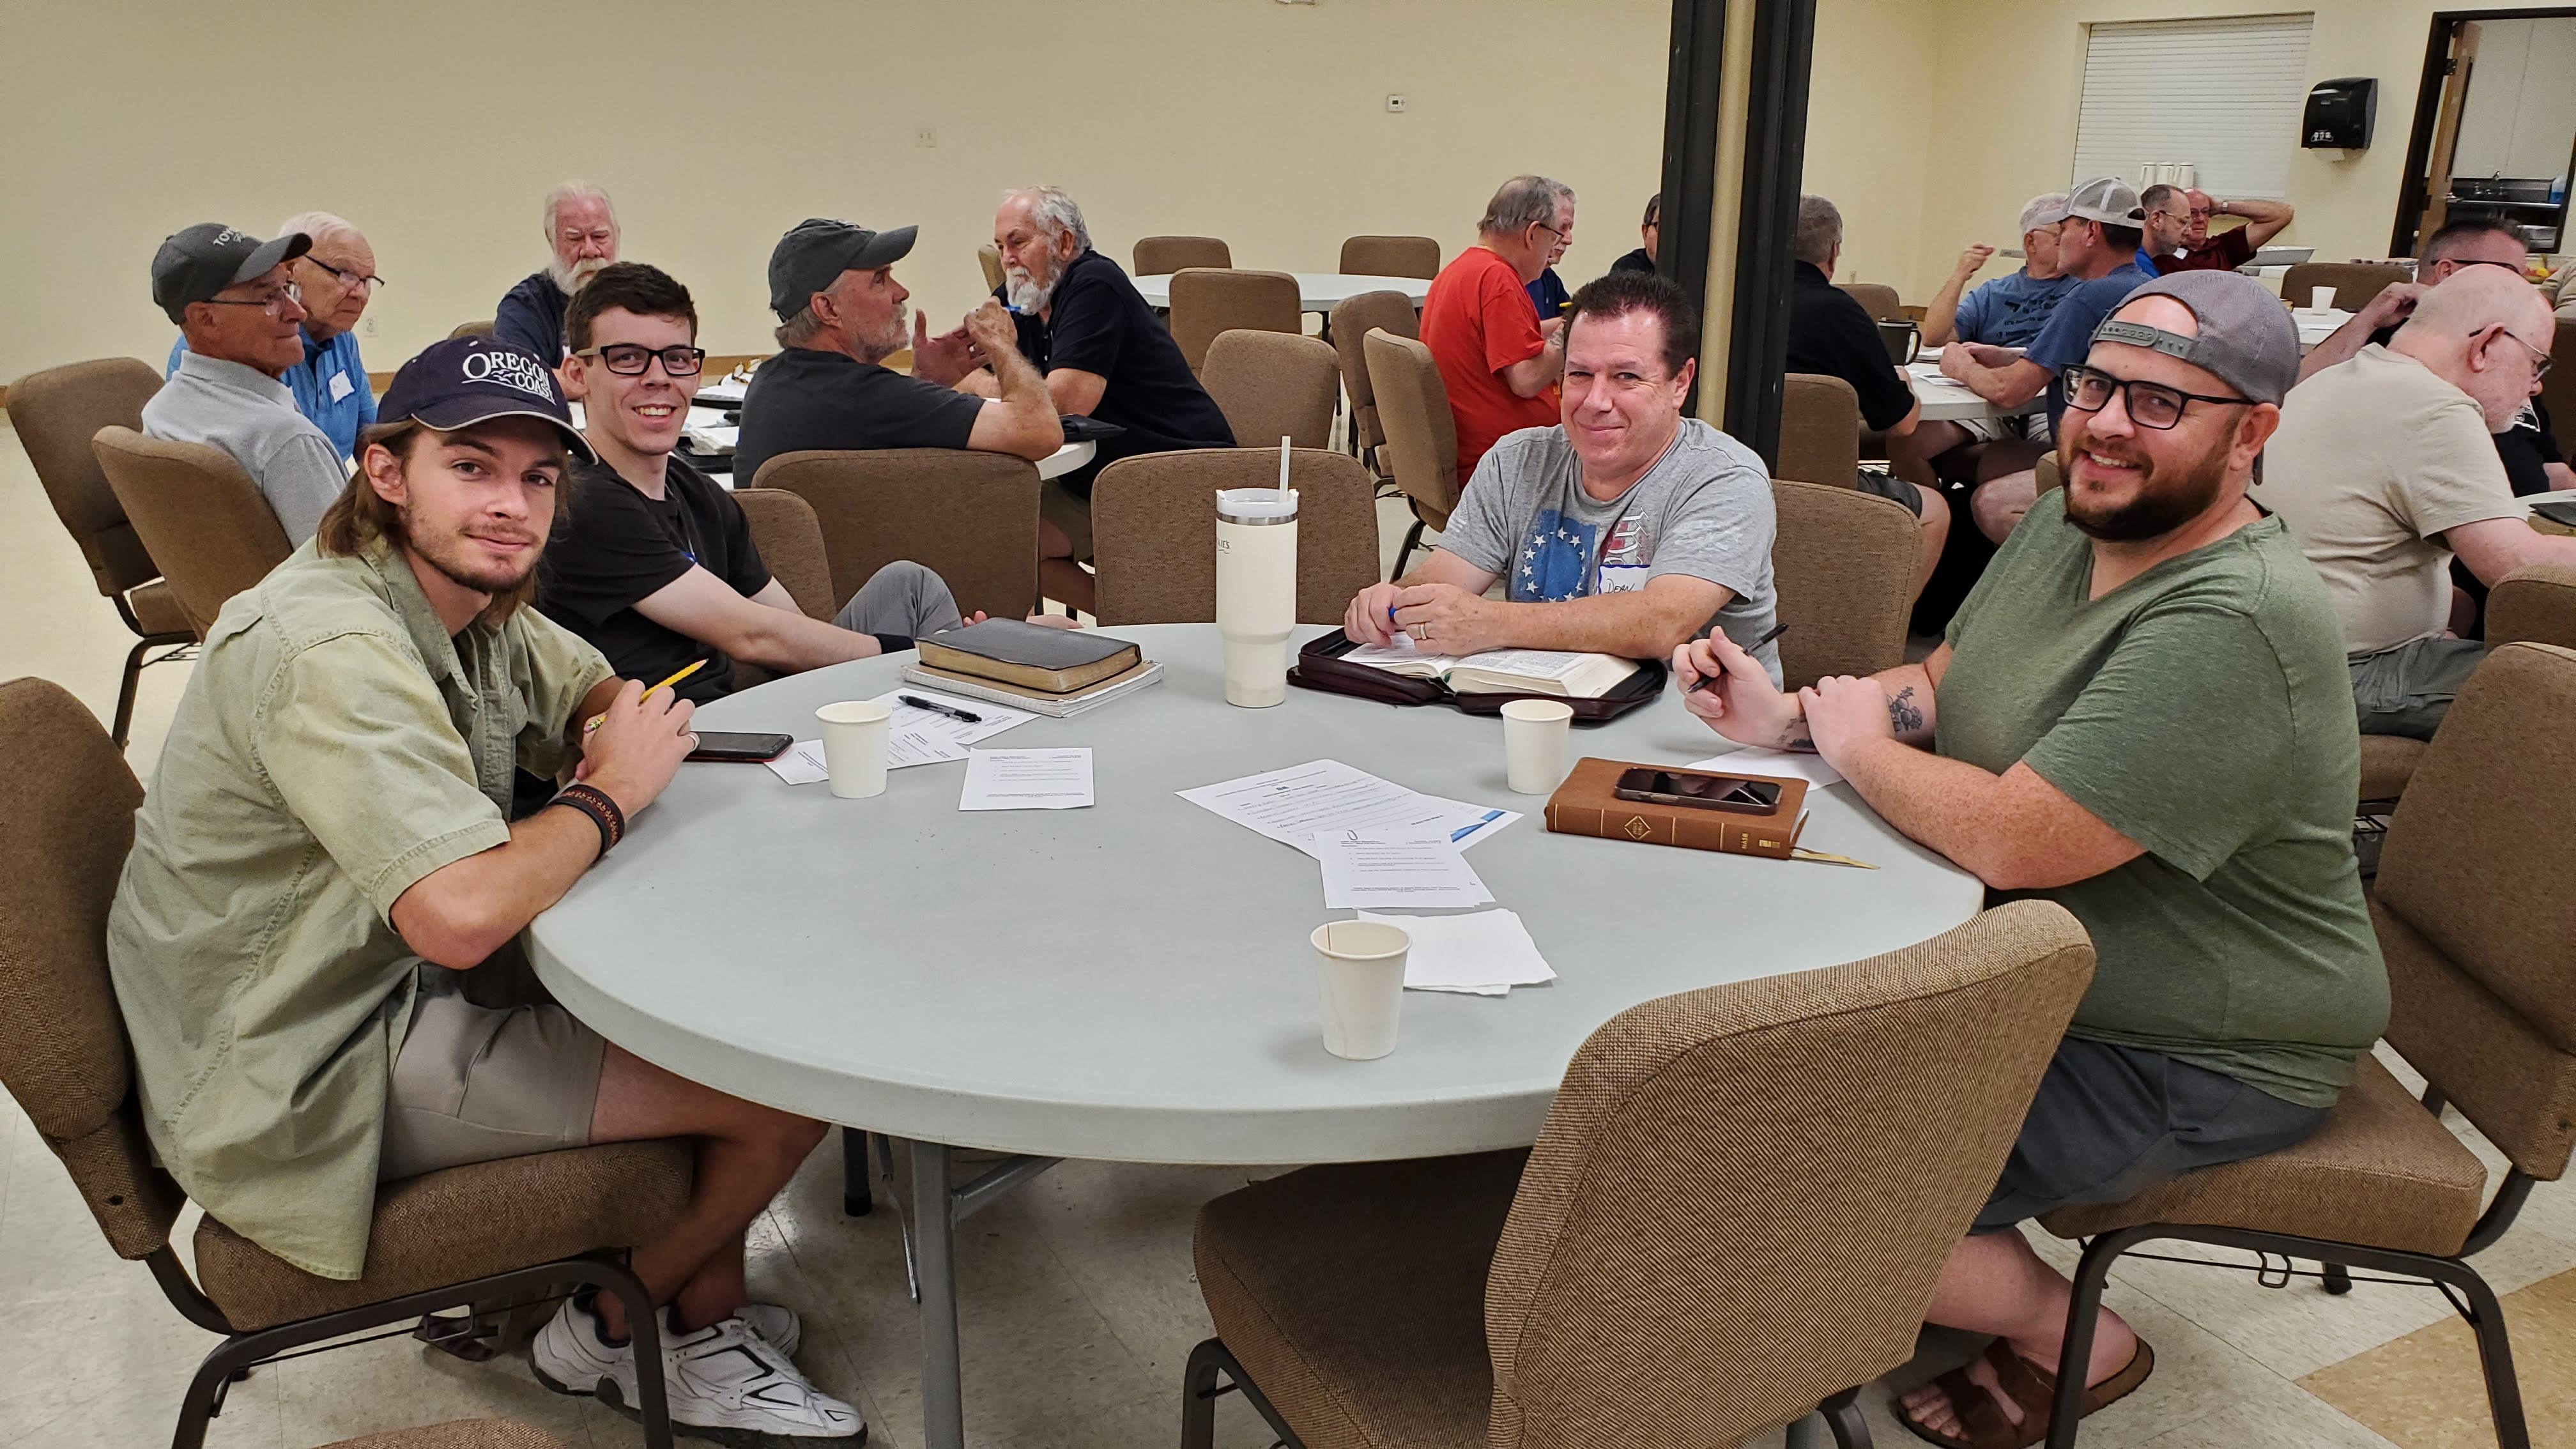 Men's Bible Study at table